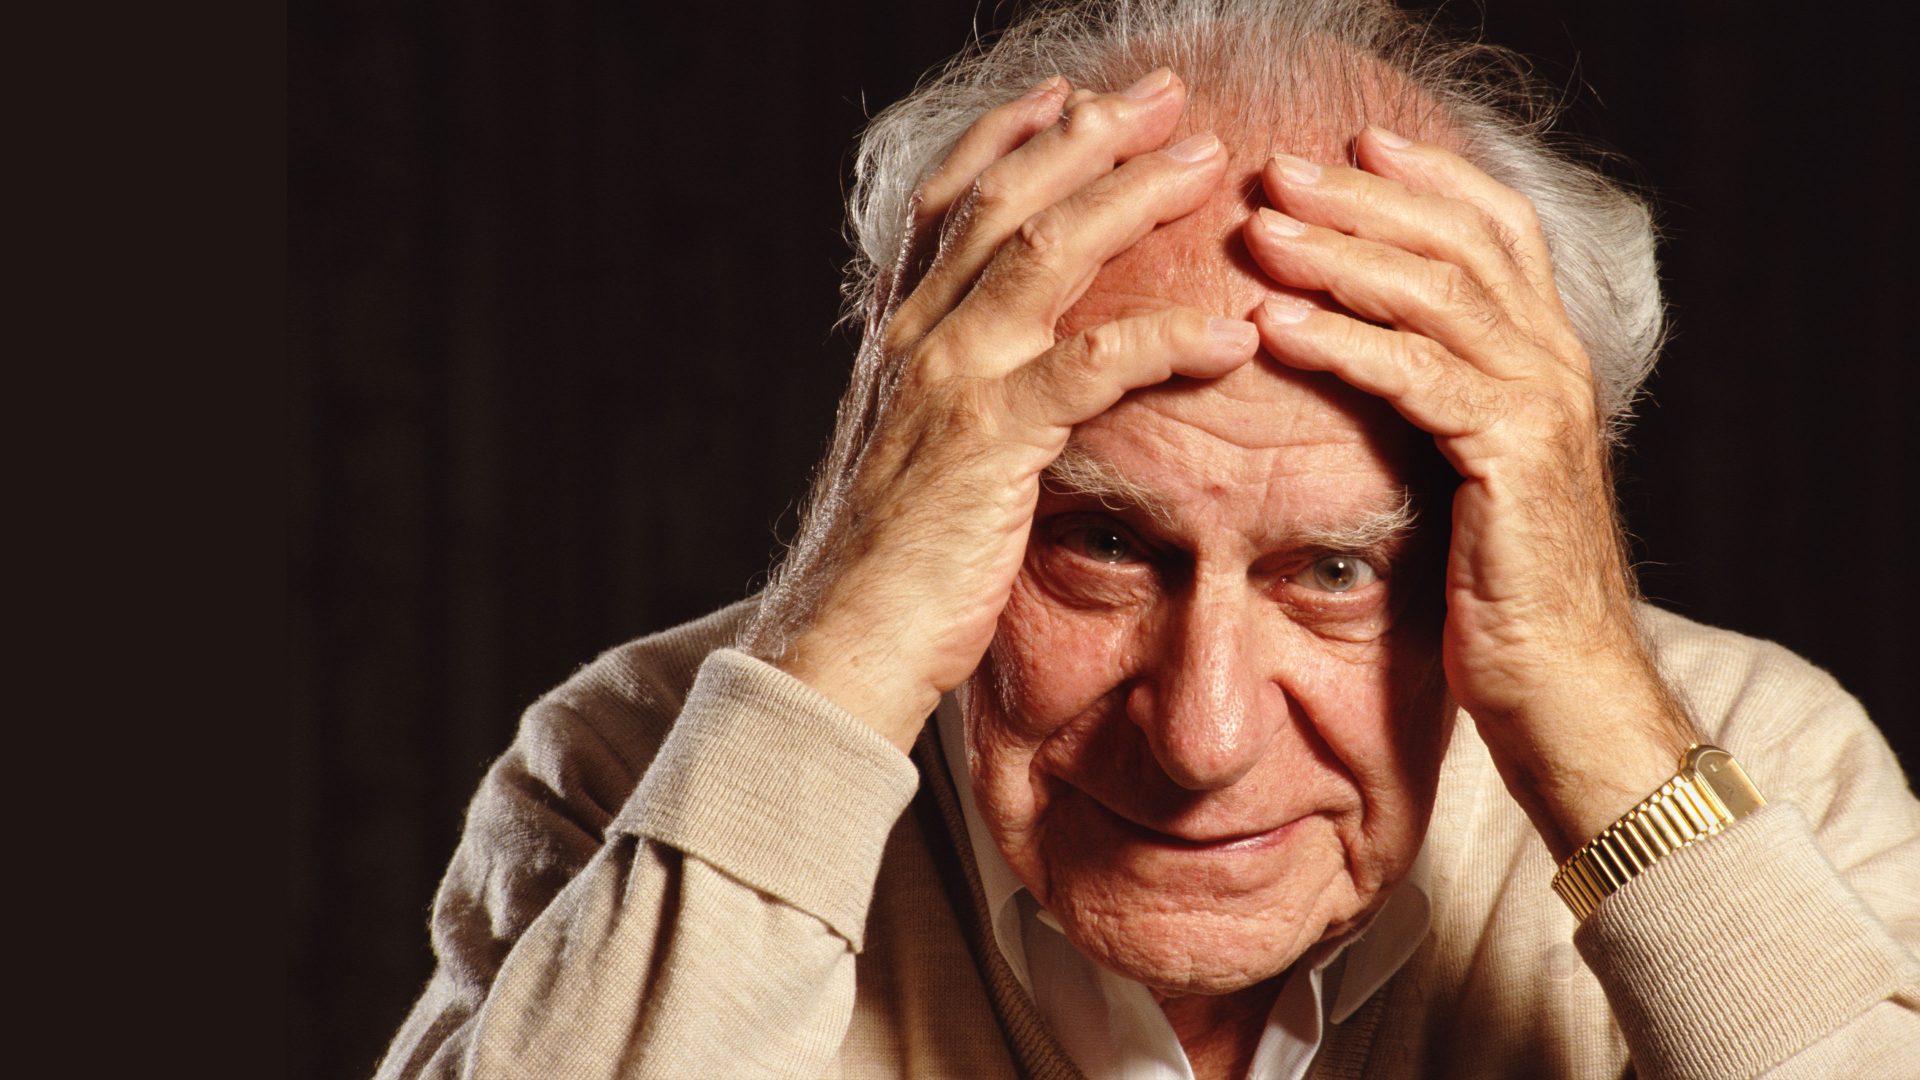 Philosopher Sir Karl Popper at his home in Croydon, August 1992. Photo: David Levenson/Getty